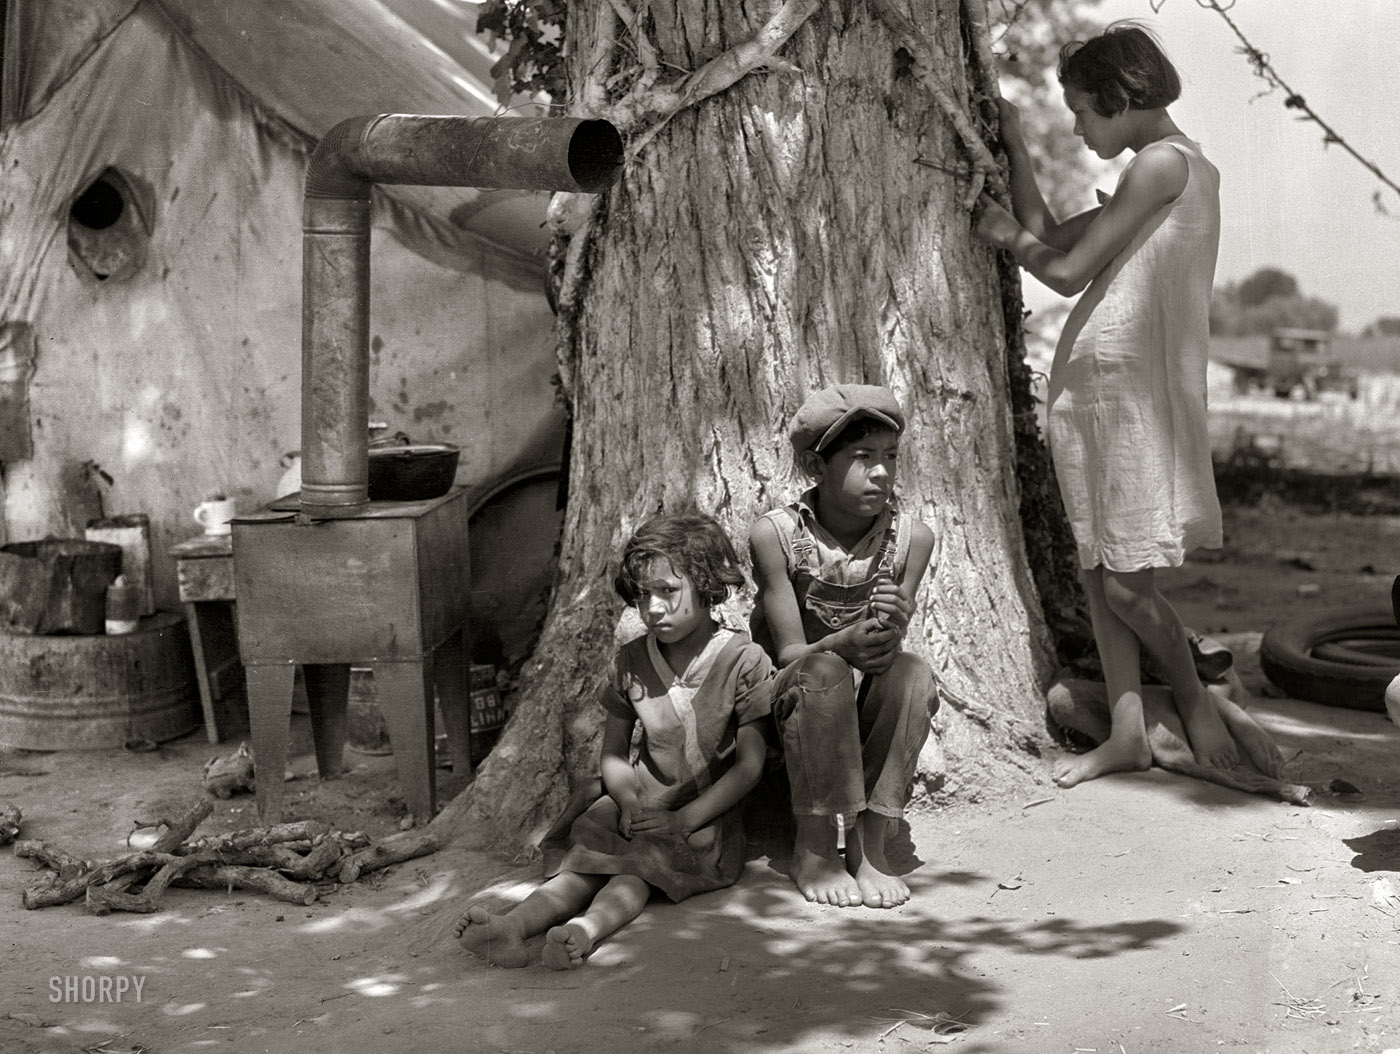 June 1935. Somewhere in California. "Motherless migrant children. They work in the cotton." Medium-format nitrate negative by Dorothea Lange for the Resettlement Administration. View full size.